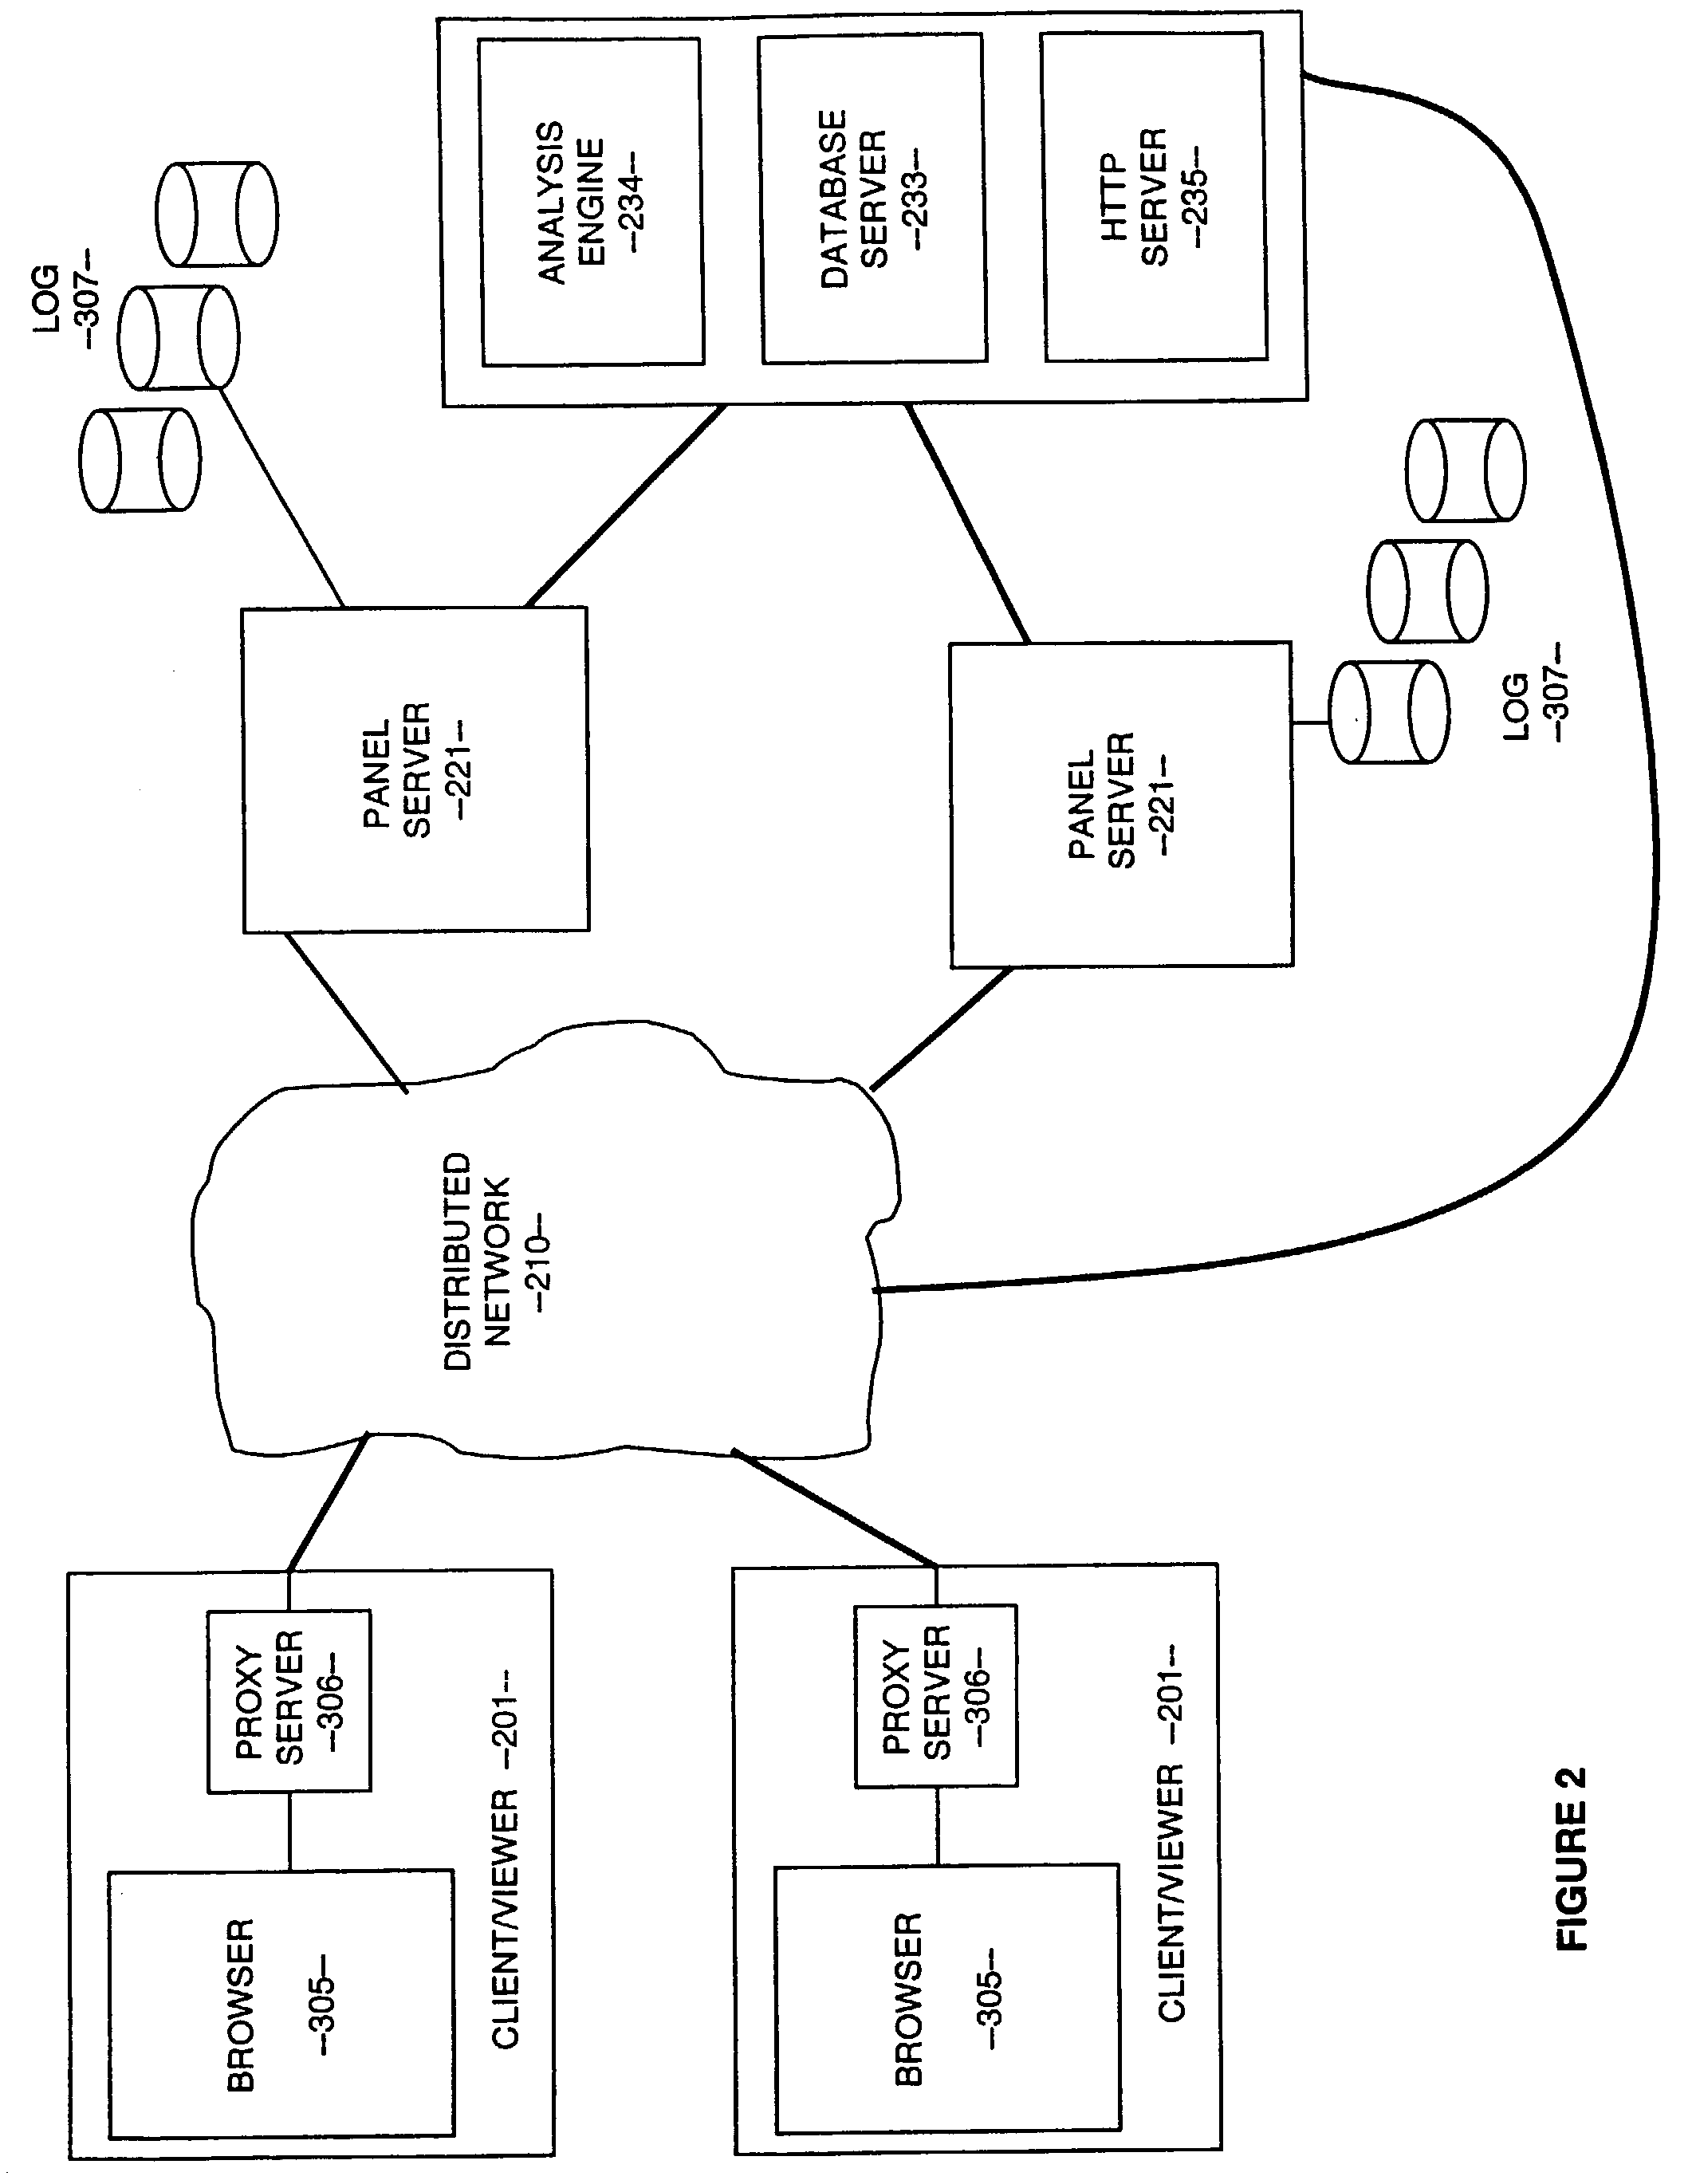 Method and apparatus for measuring user access to image data